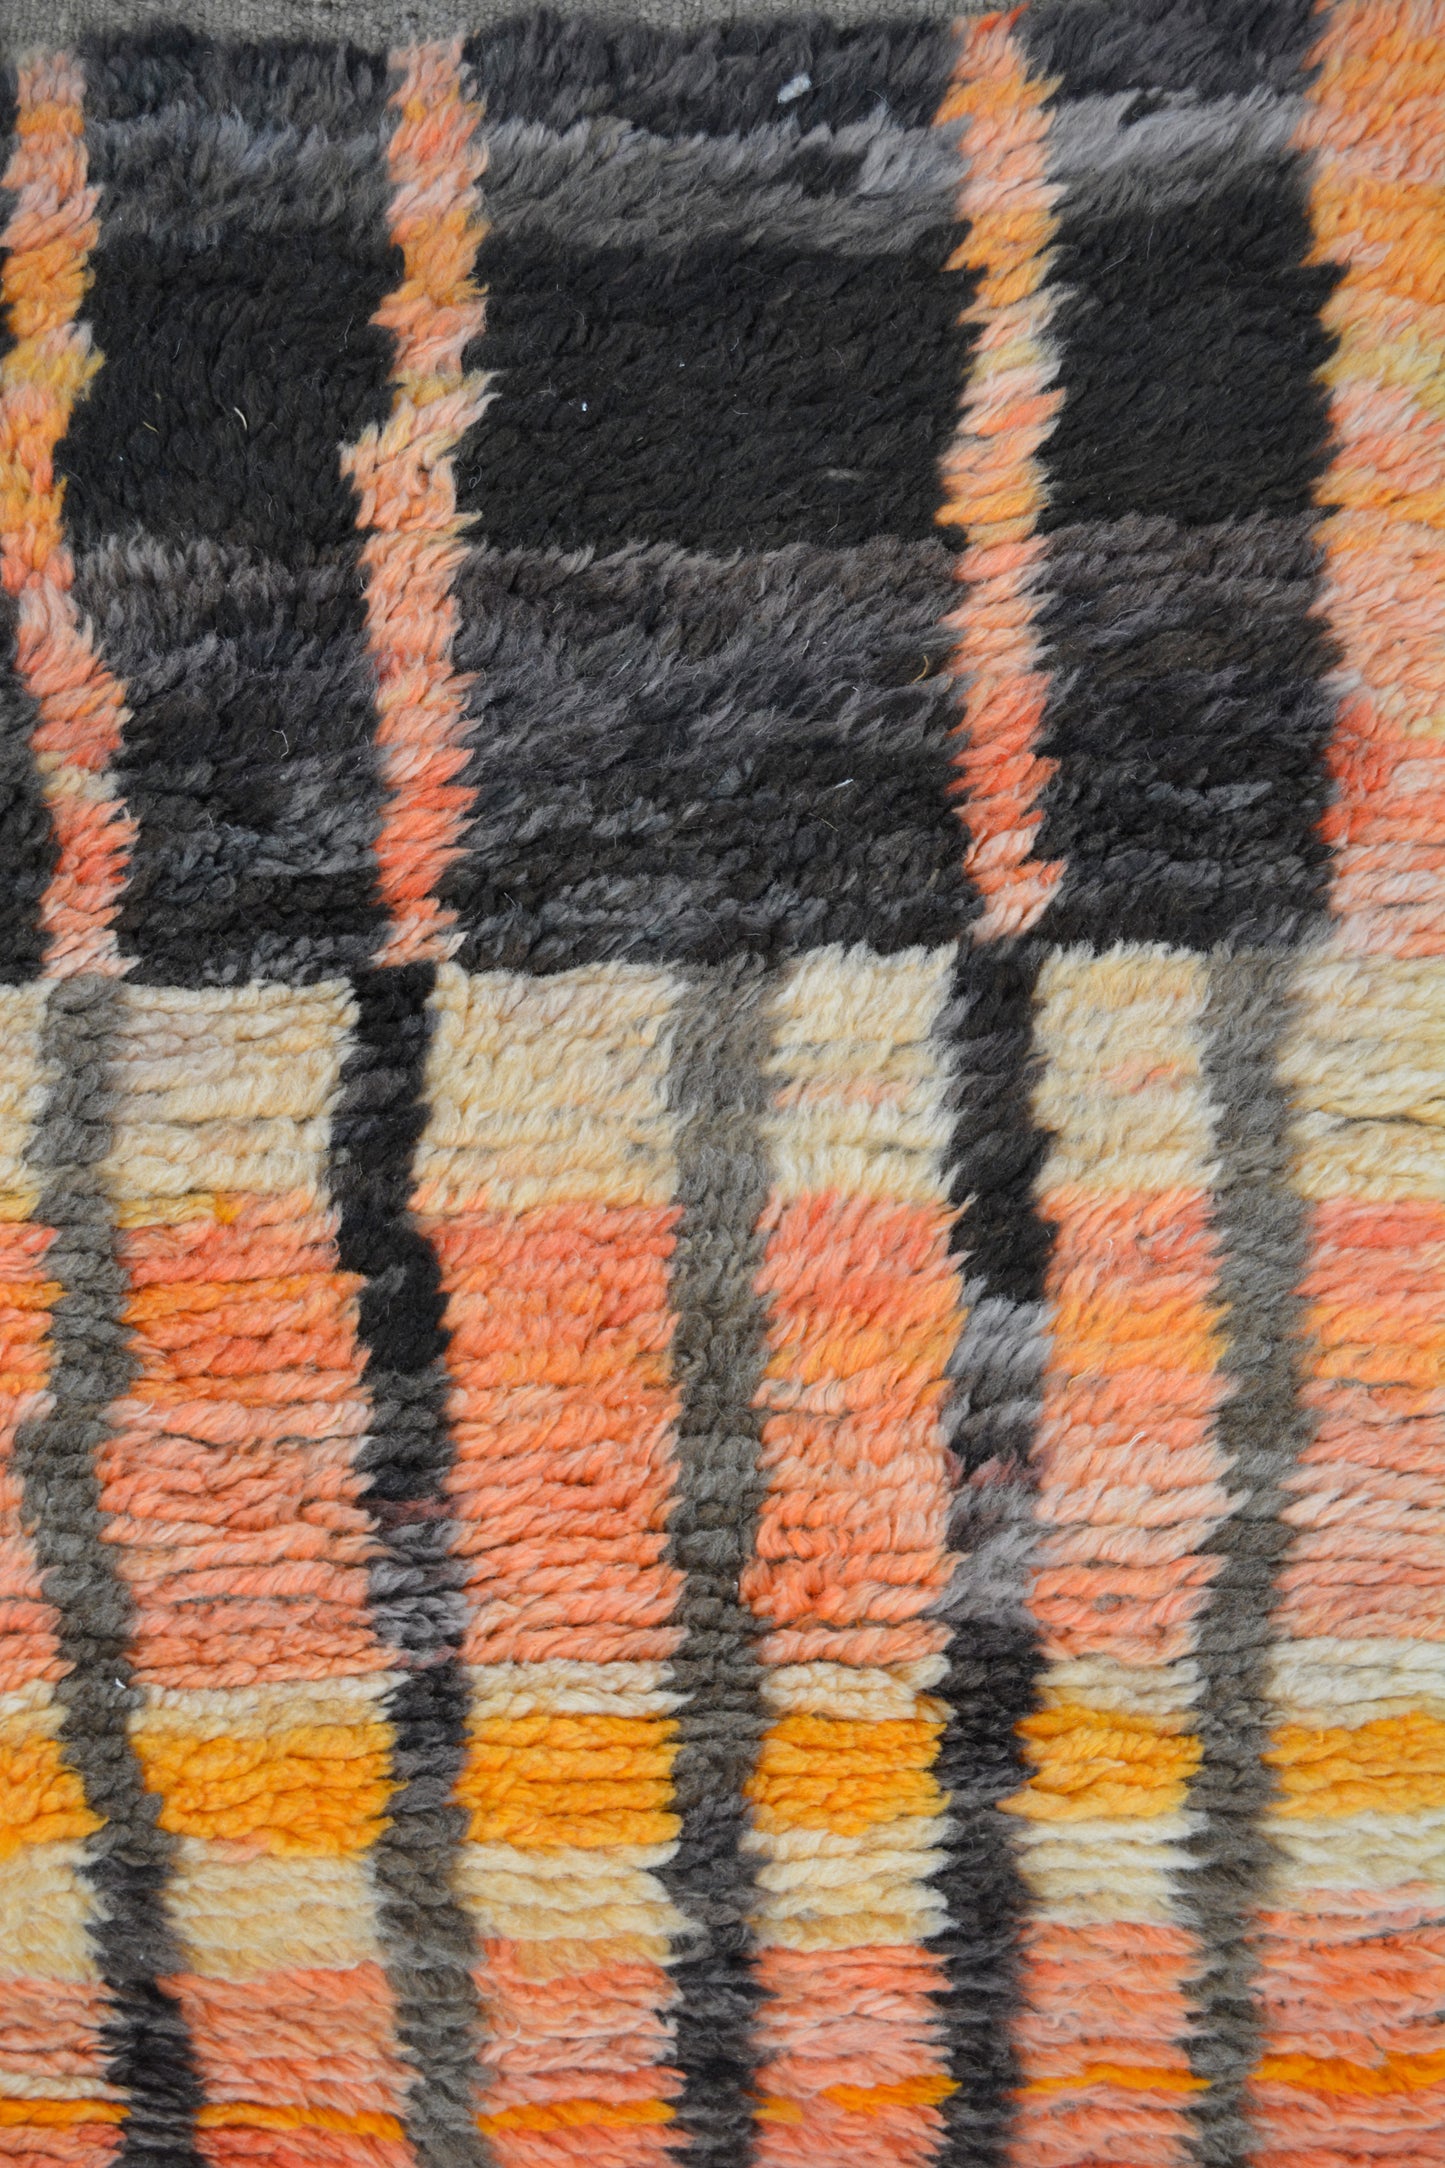 The rug's color palette has orange, black, yellow, and beige.